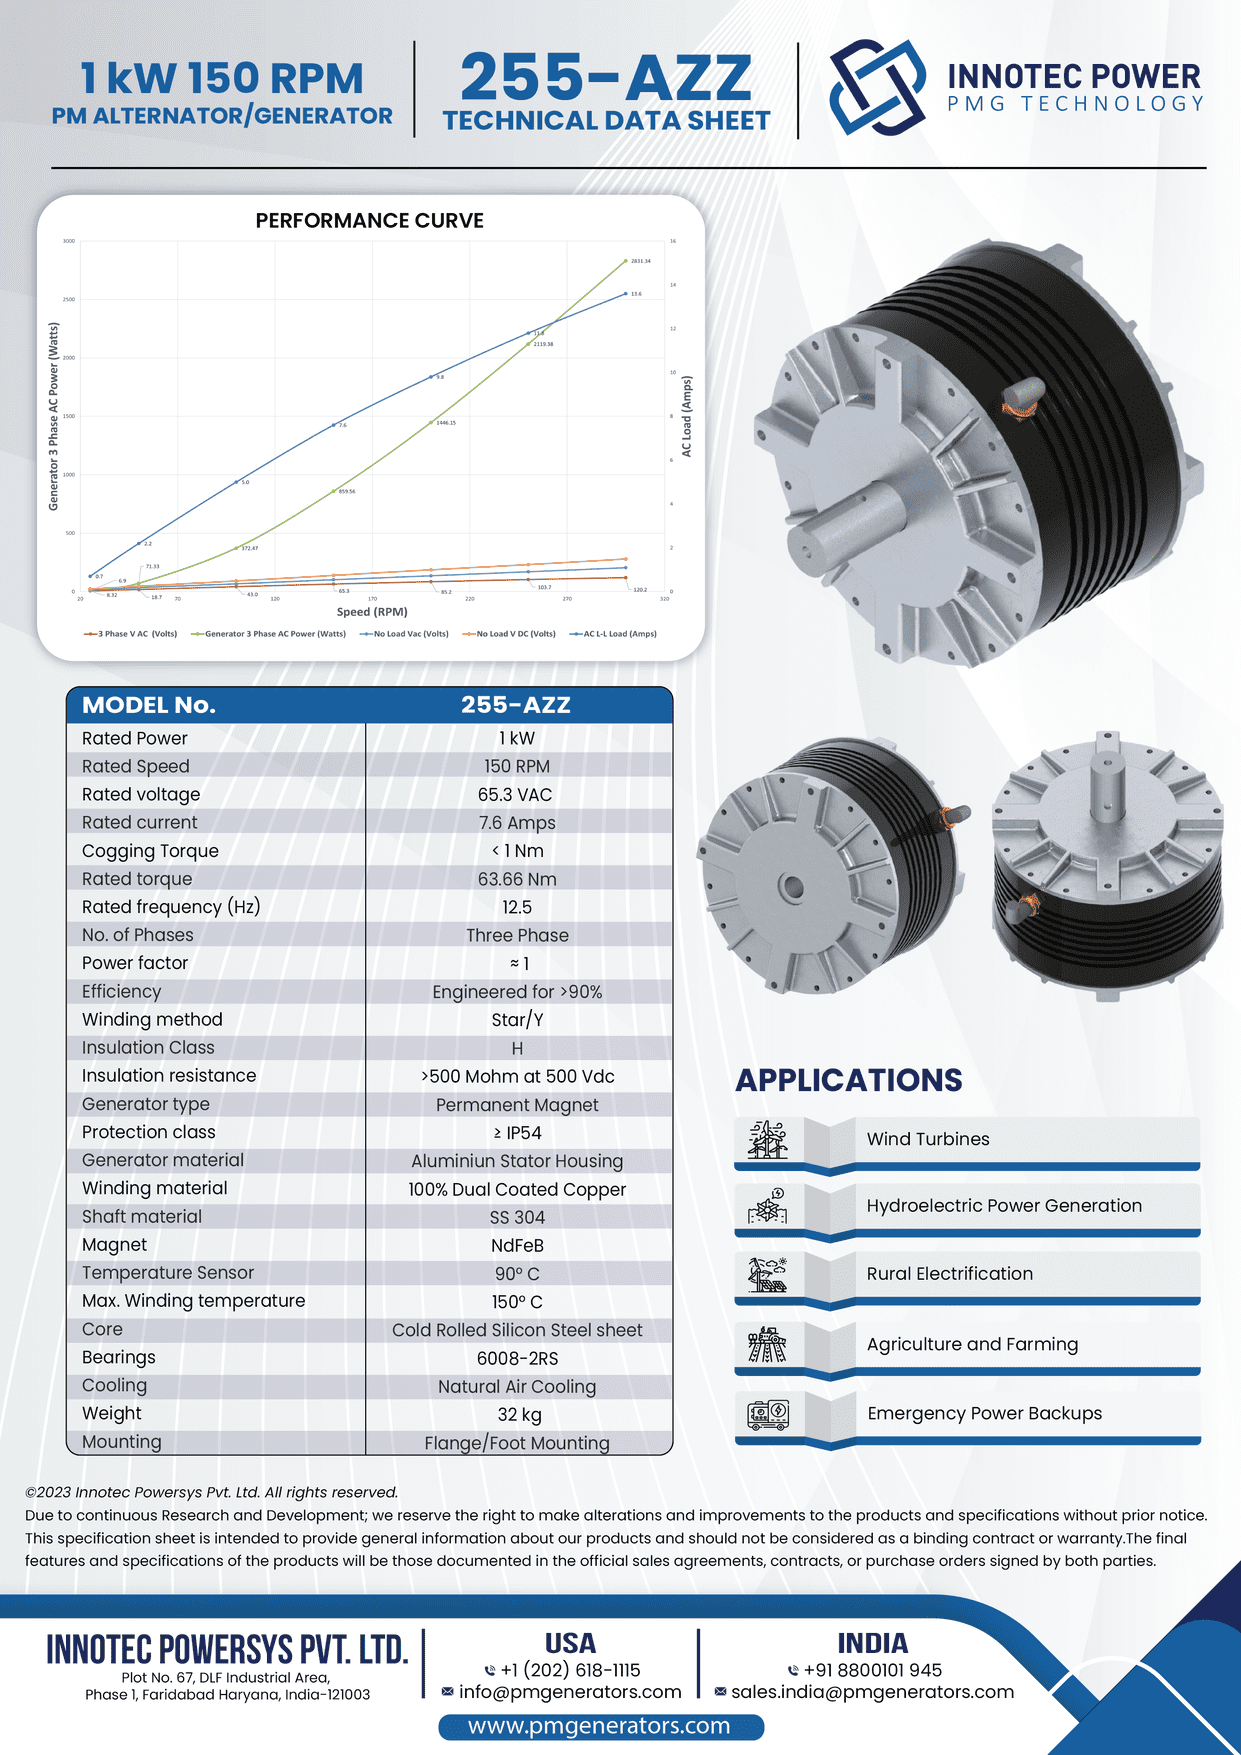 This is our 1kW Wind Turbine Alternator for Applications at 150 RPM